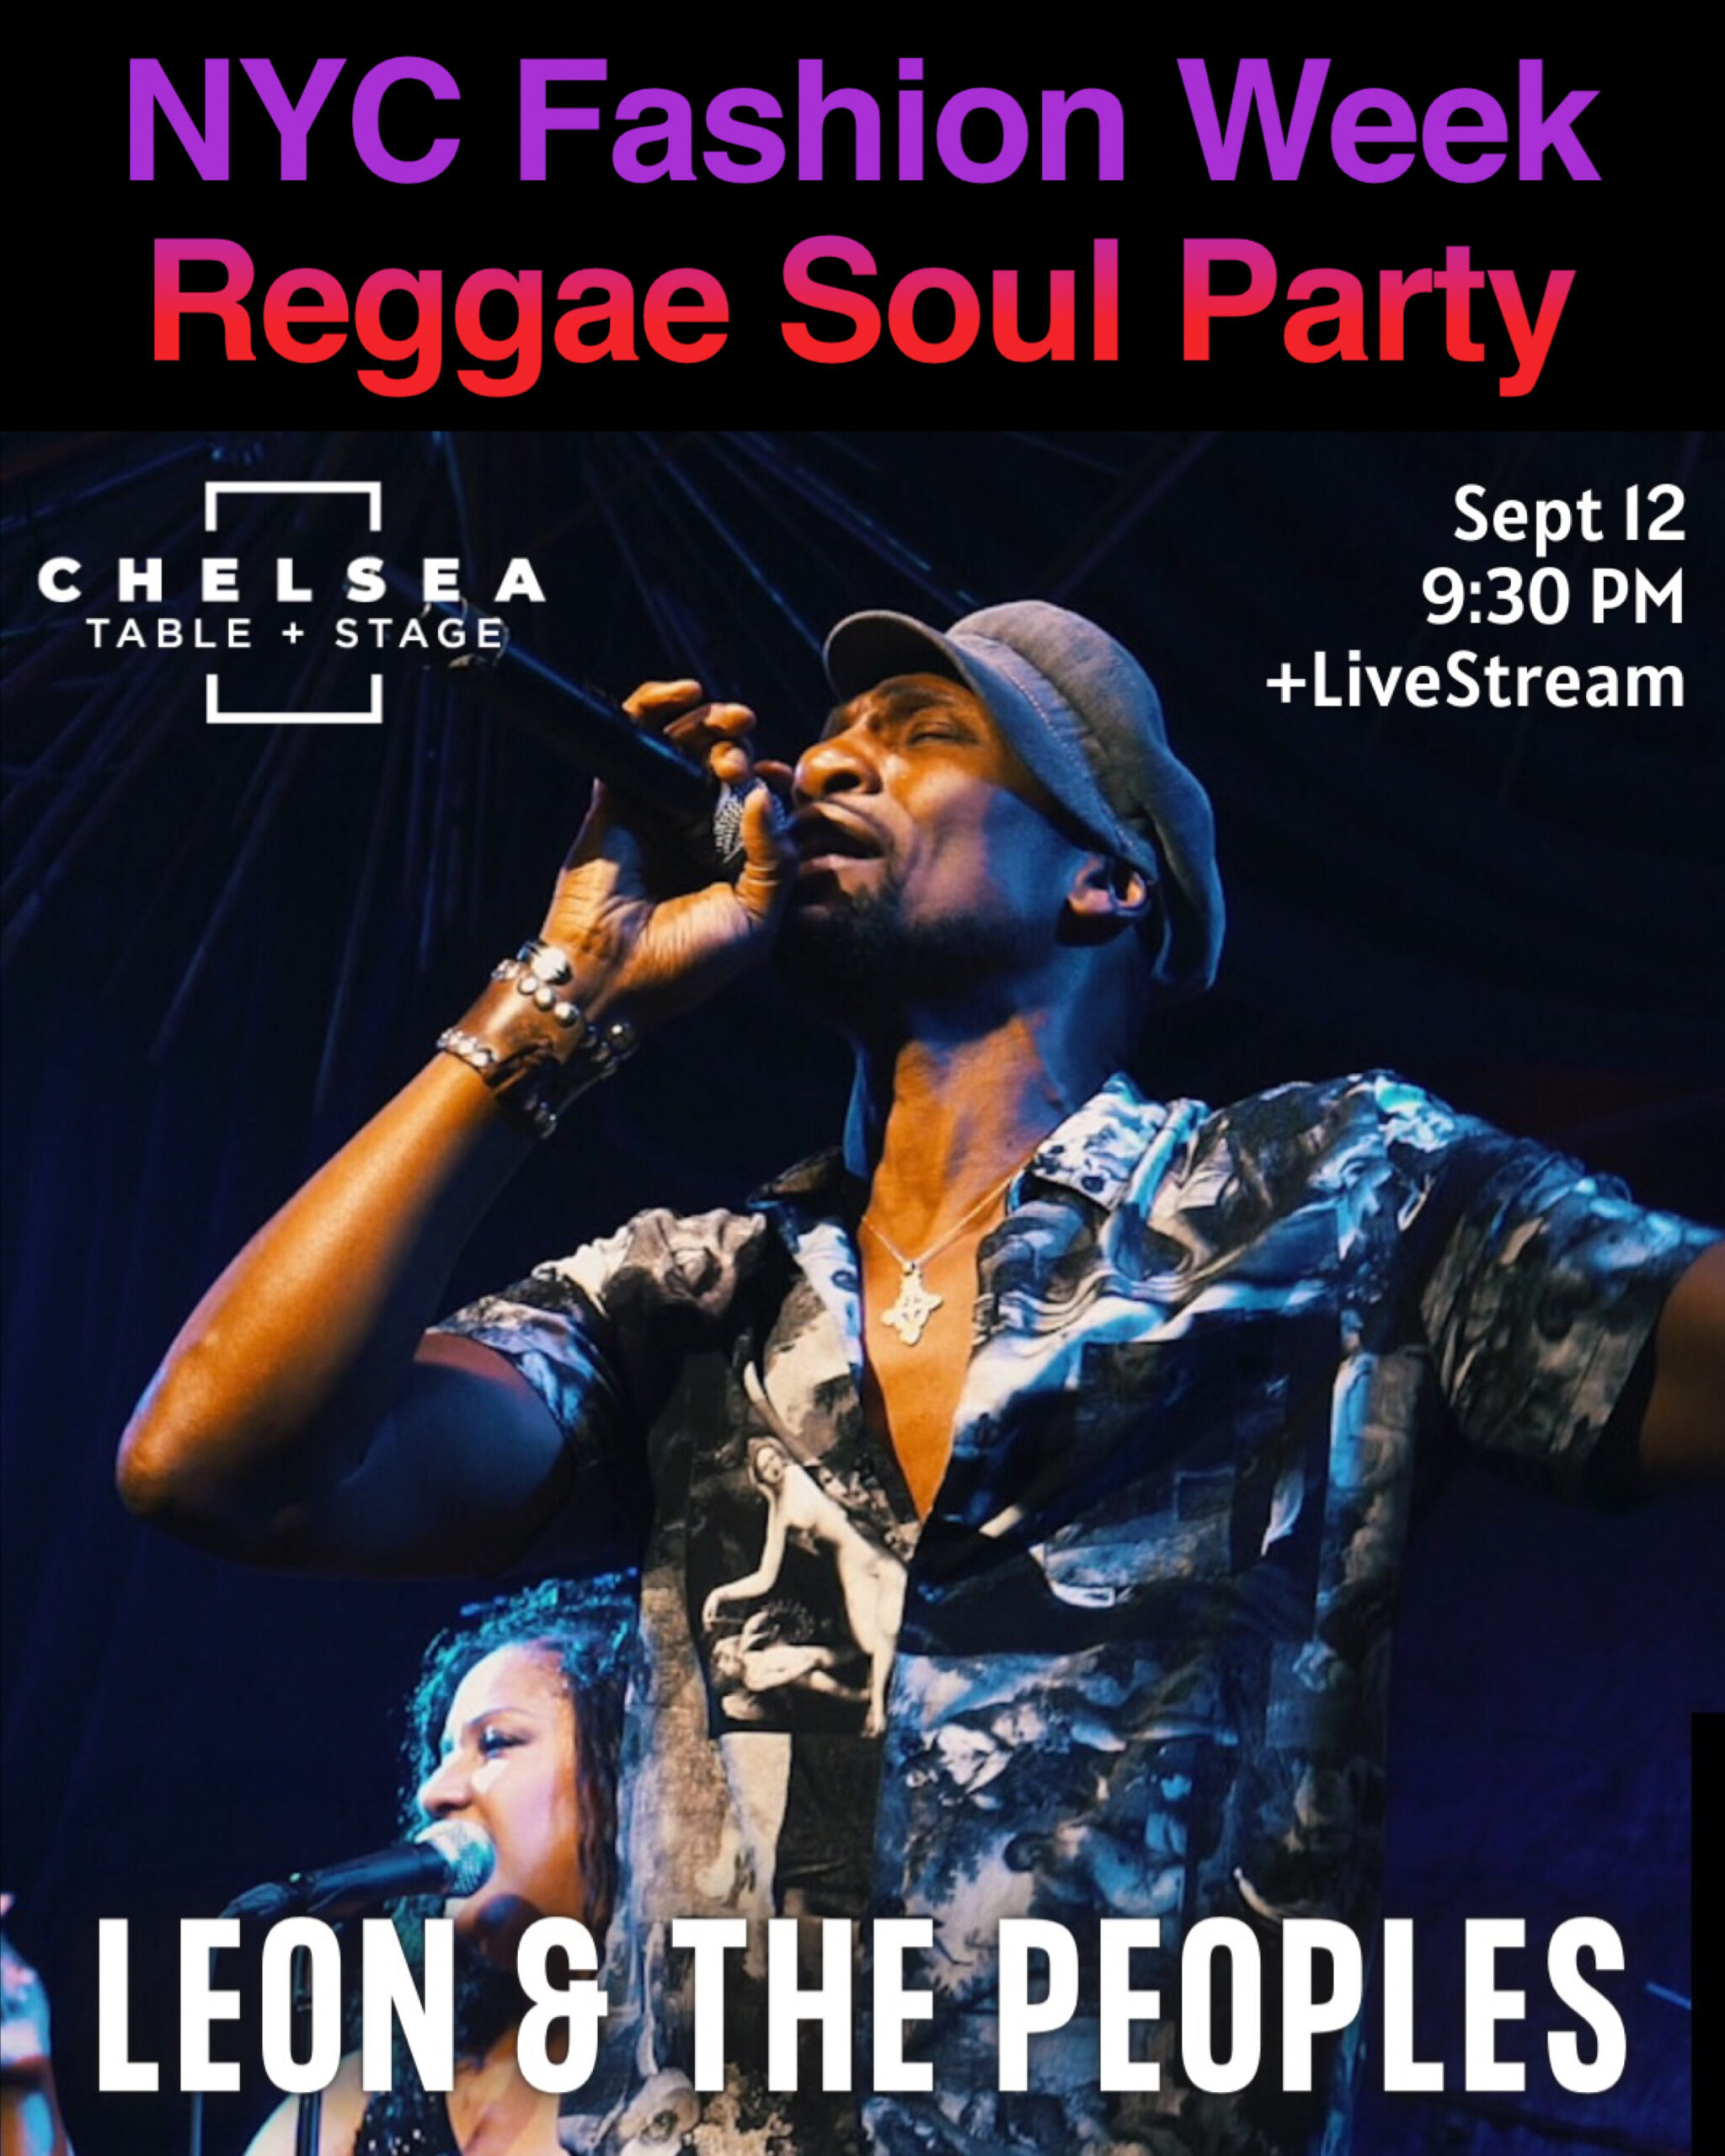 NYC Fashion Week Reggae Soul Party w/ LEON & THE PEOPLES